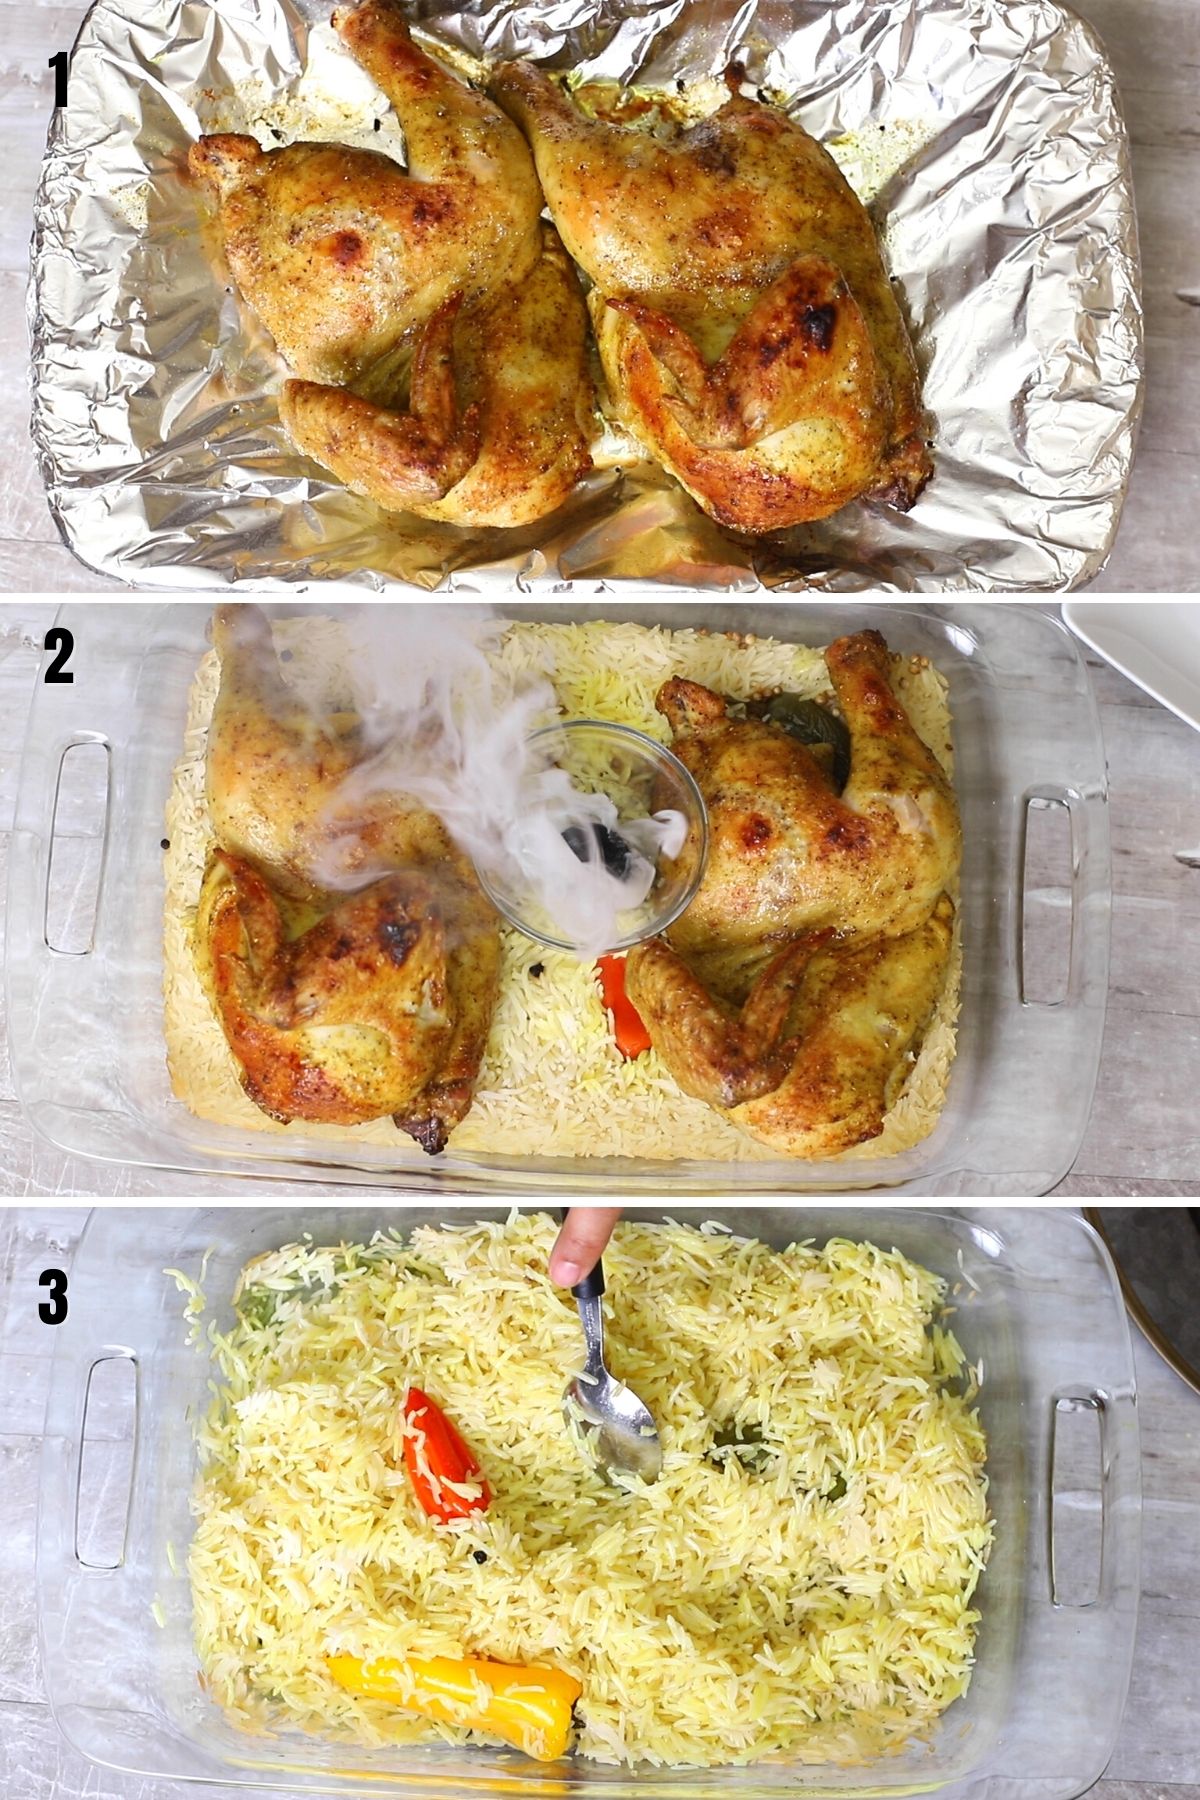 A collage of three images showing how to smoke infuse mandi dish.